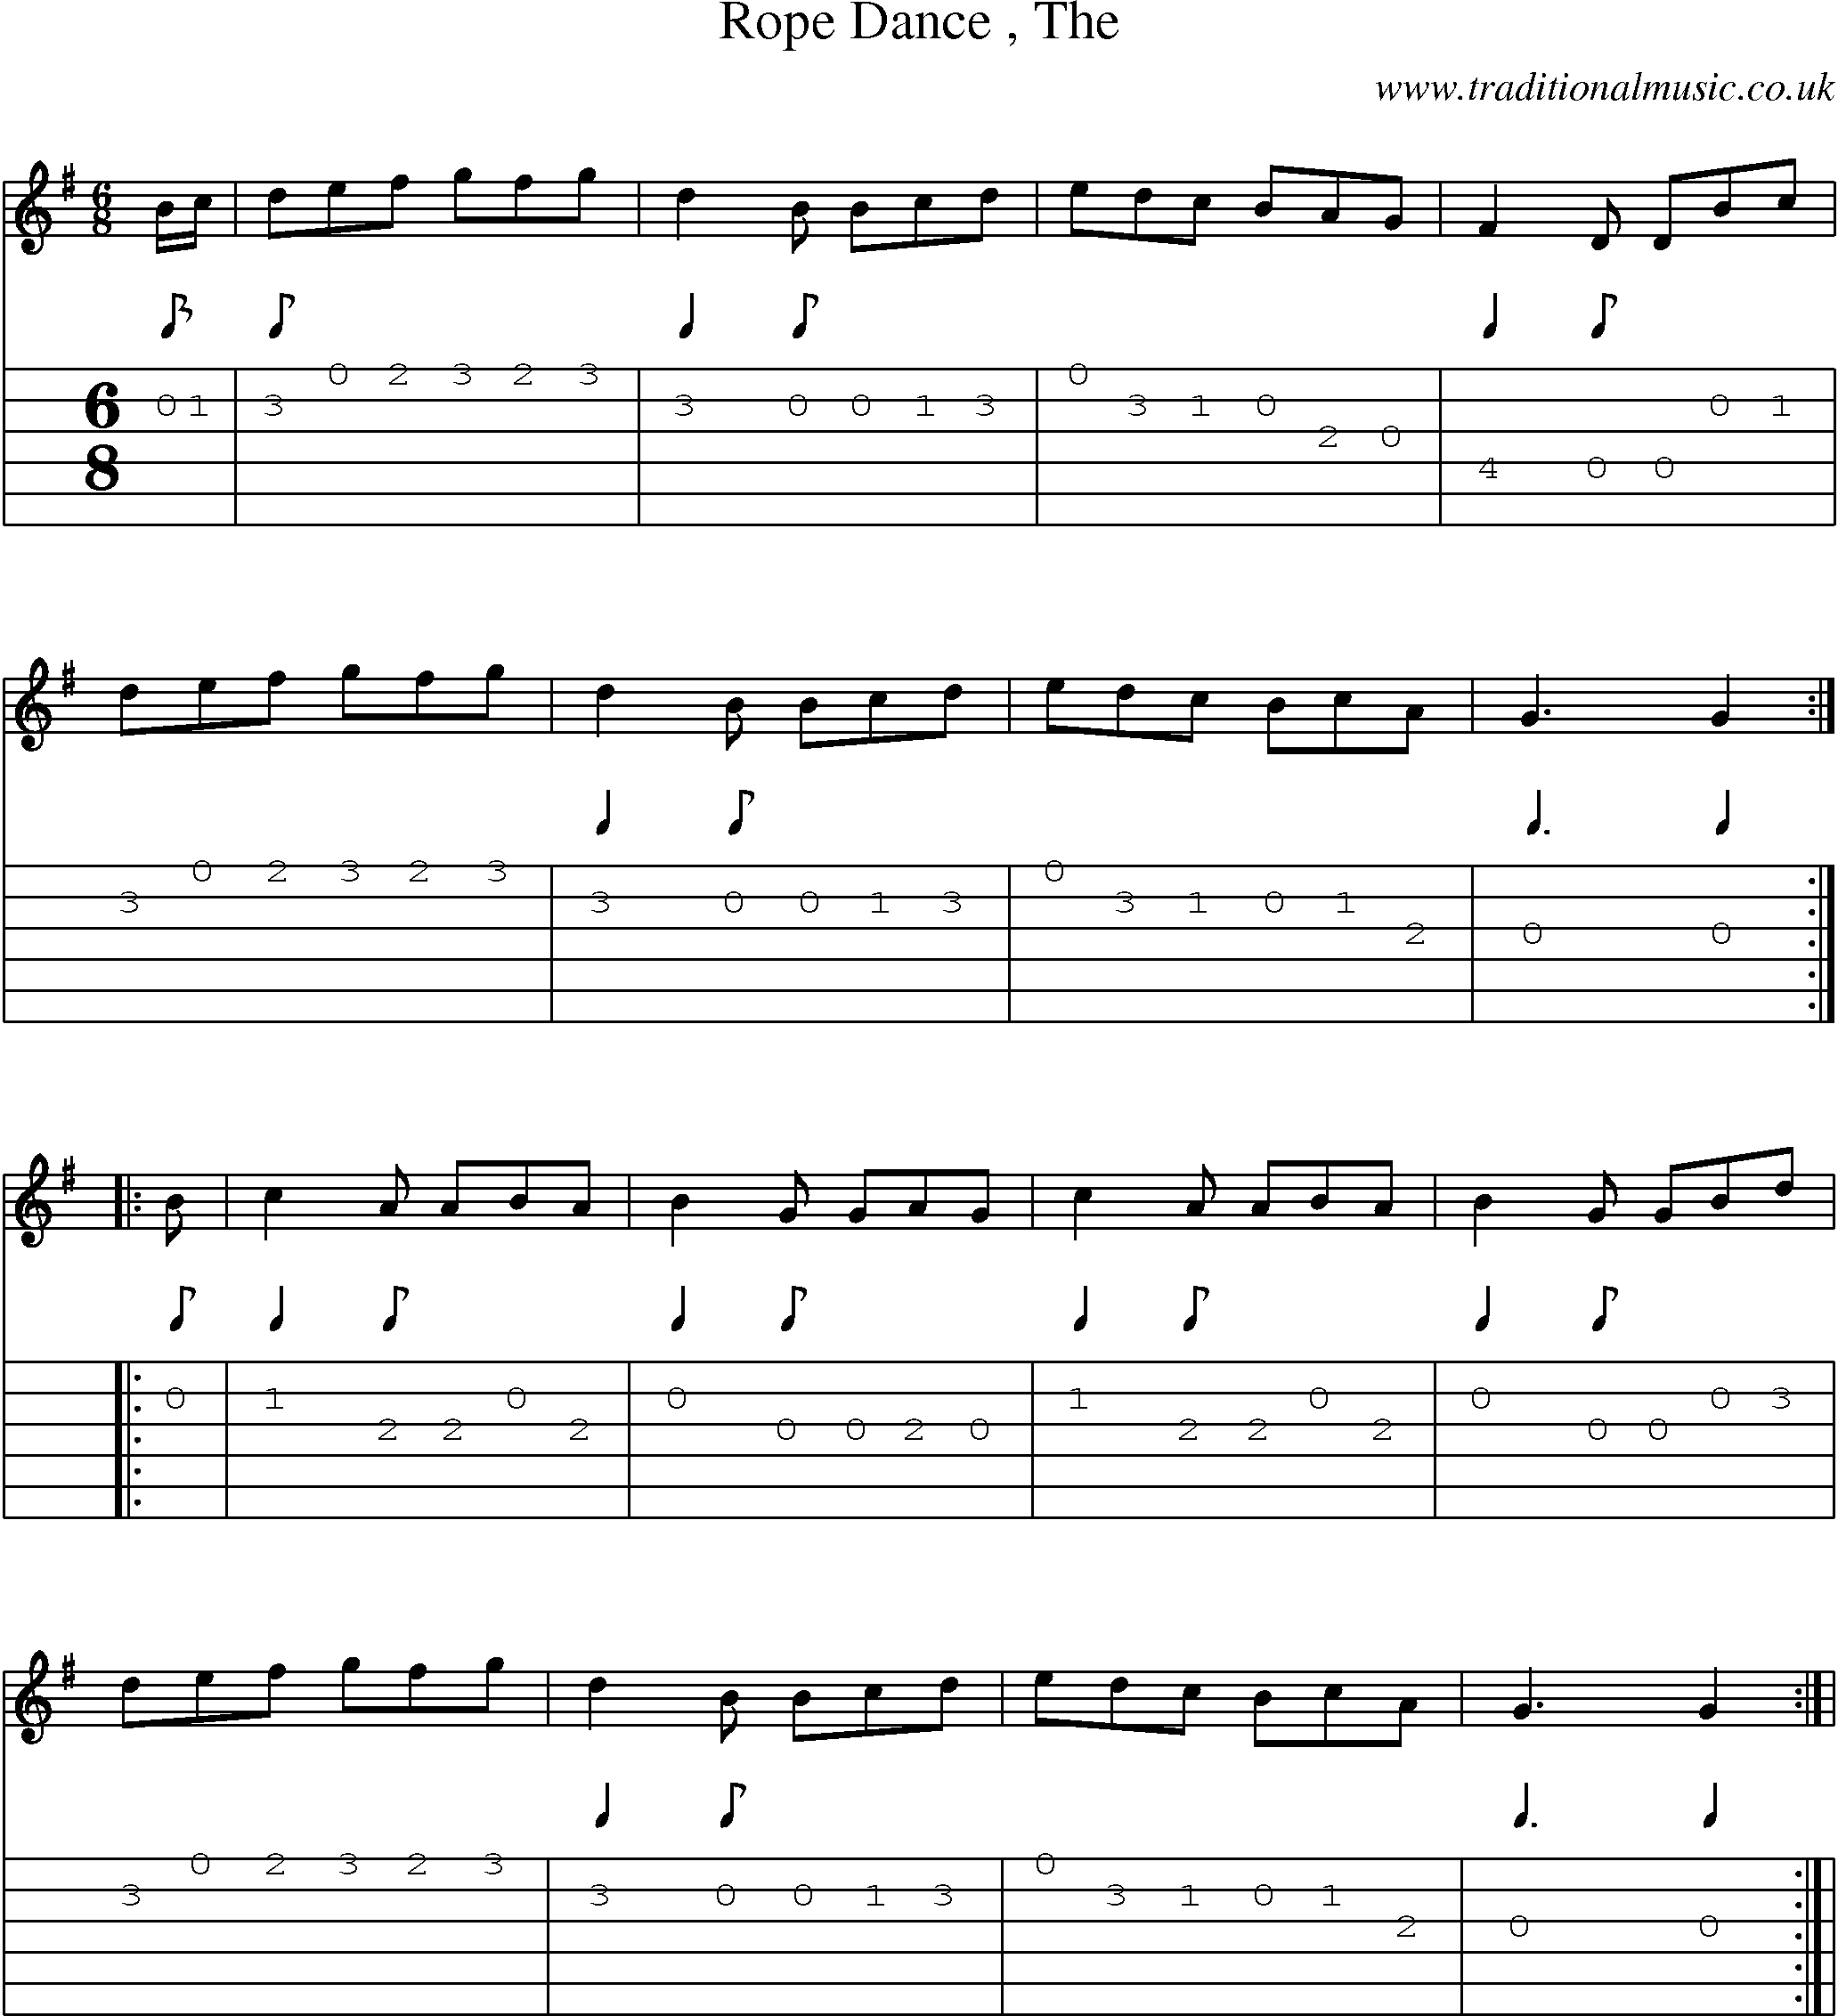 Music Score and Guitar Tabs for Rope Dance